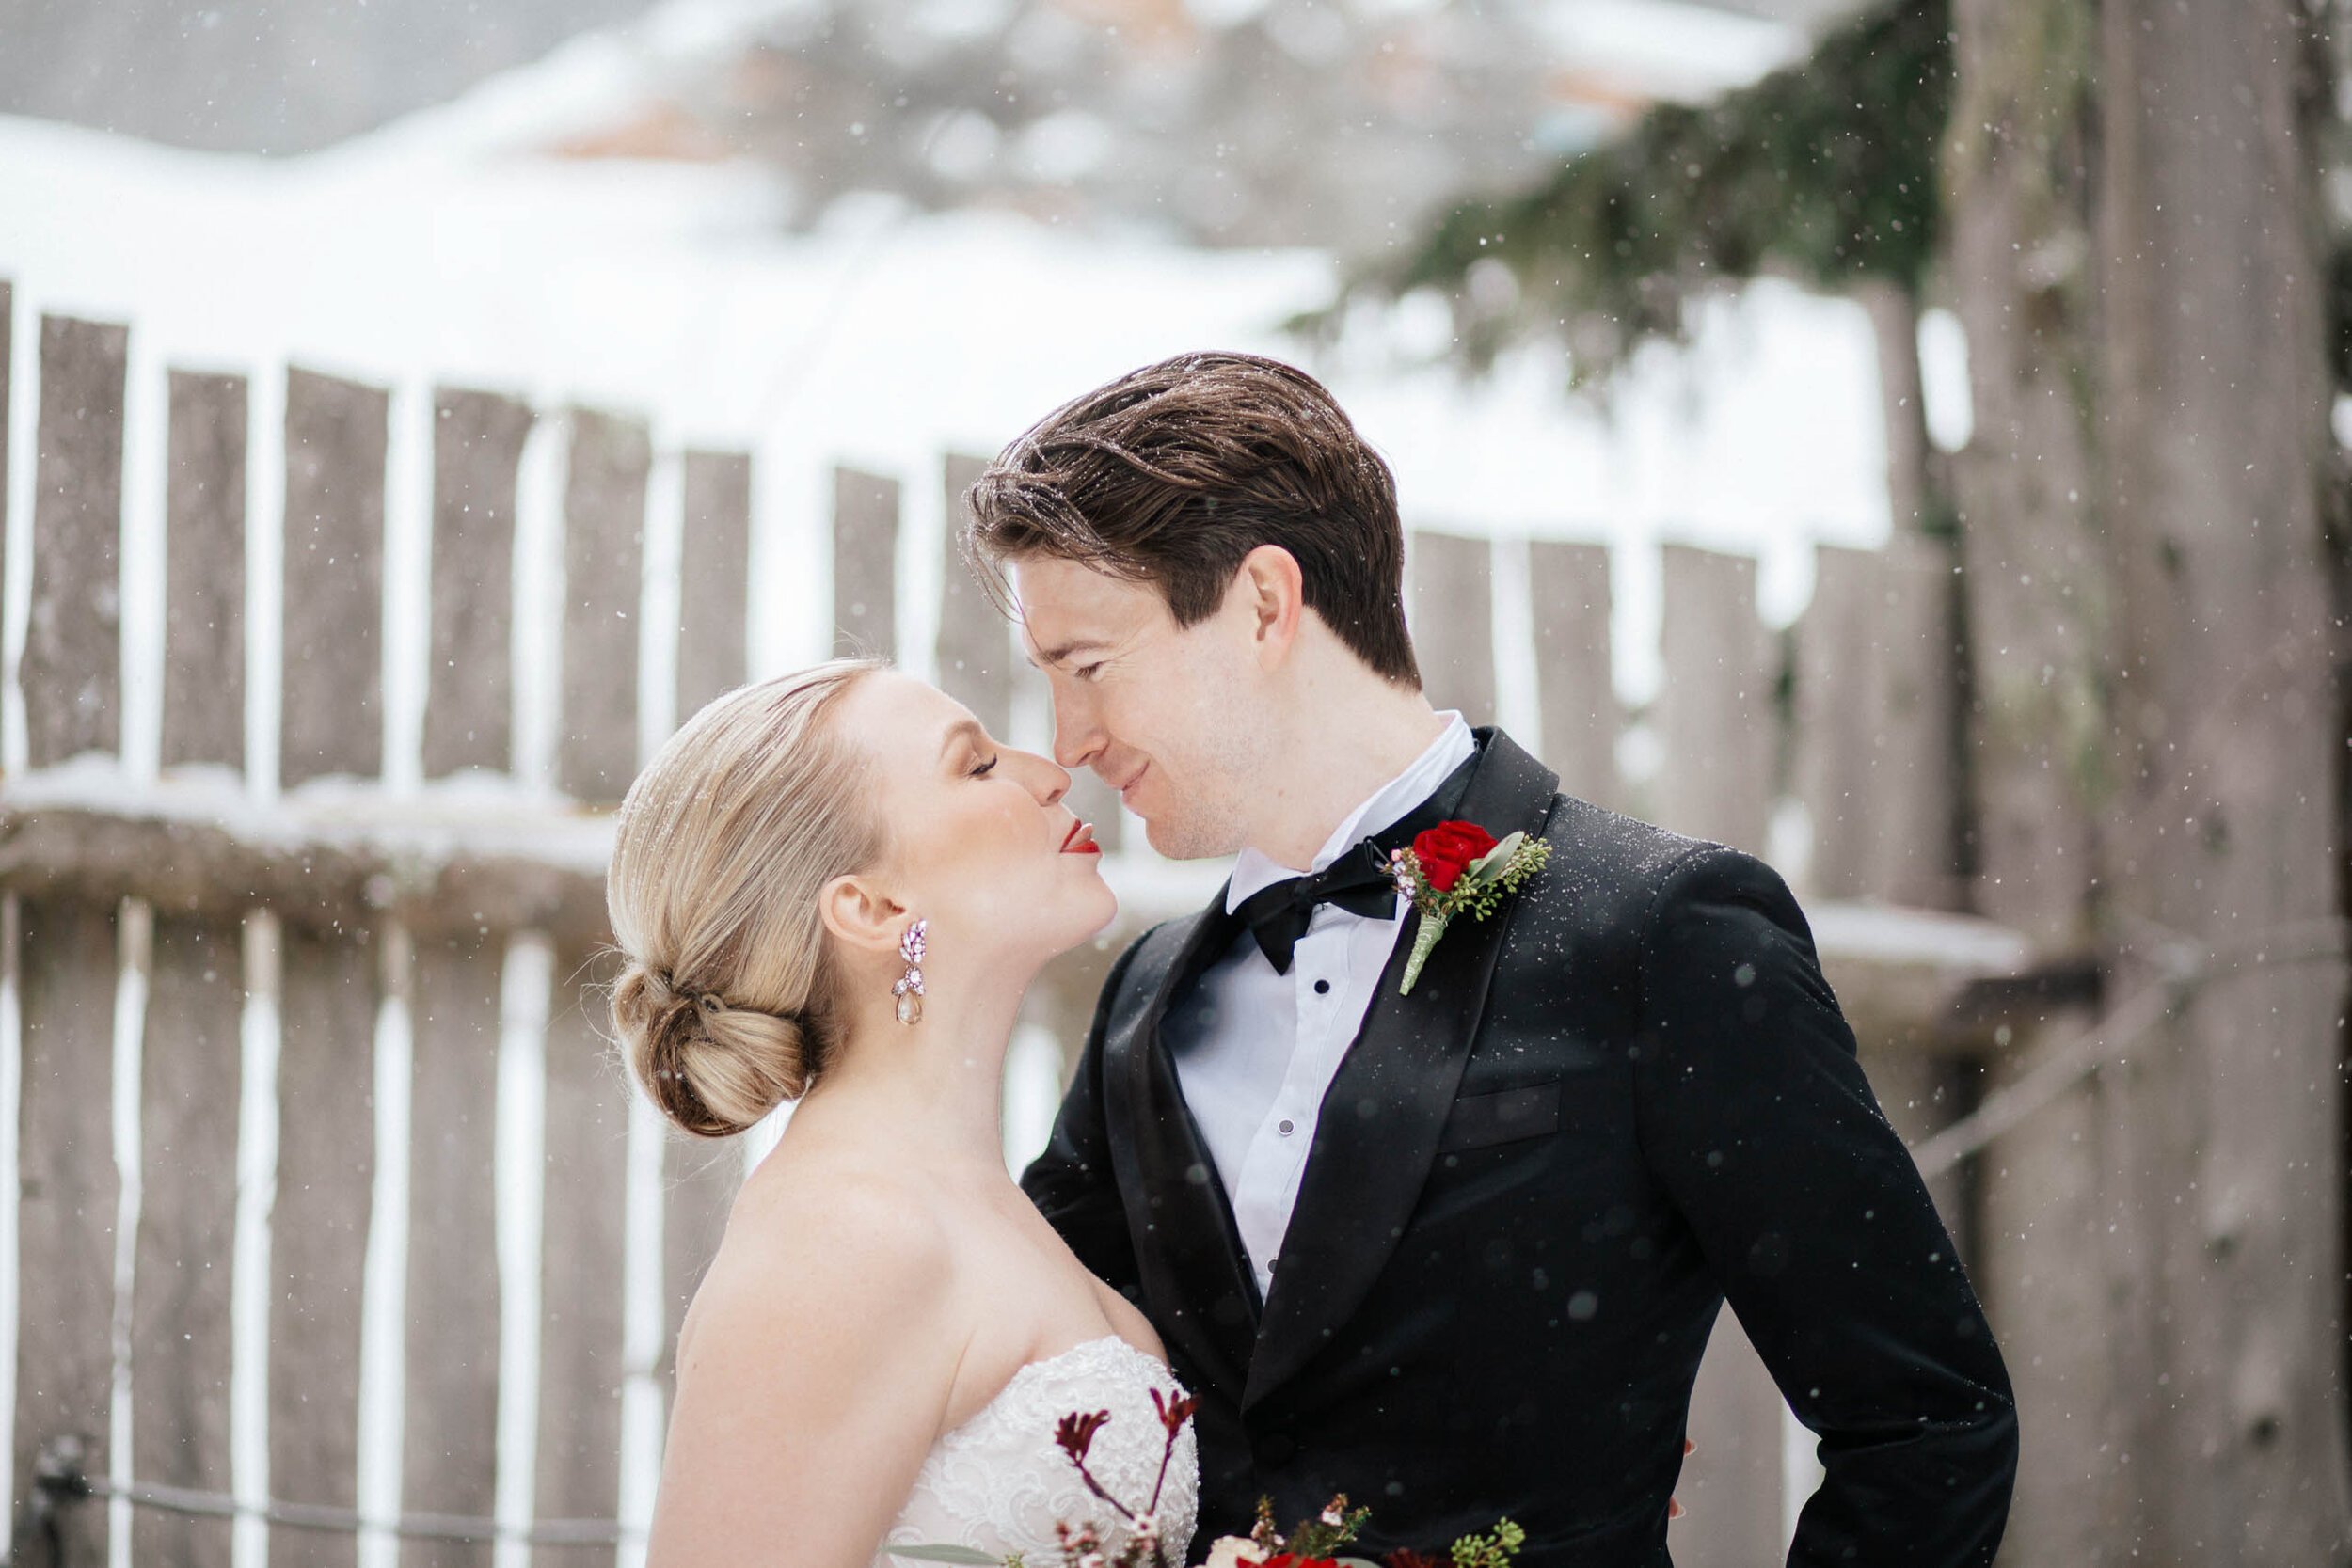 A bride sticks her tough out at her groom in a cheeky moment in Whistler BC.